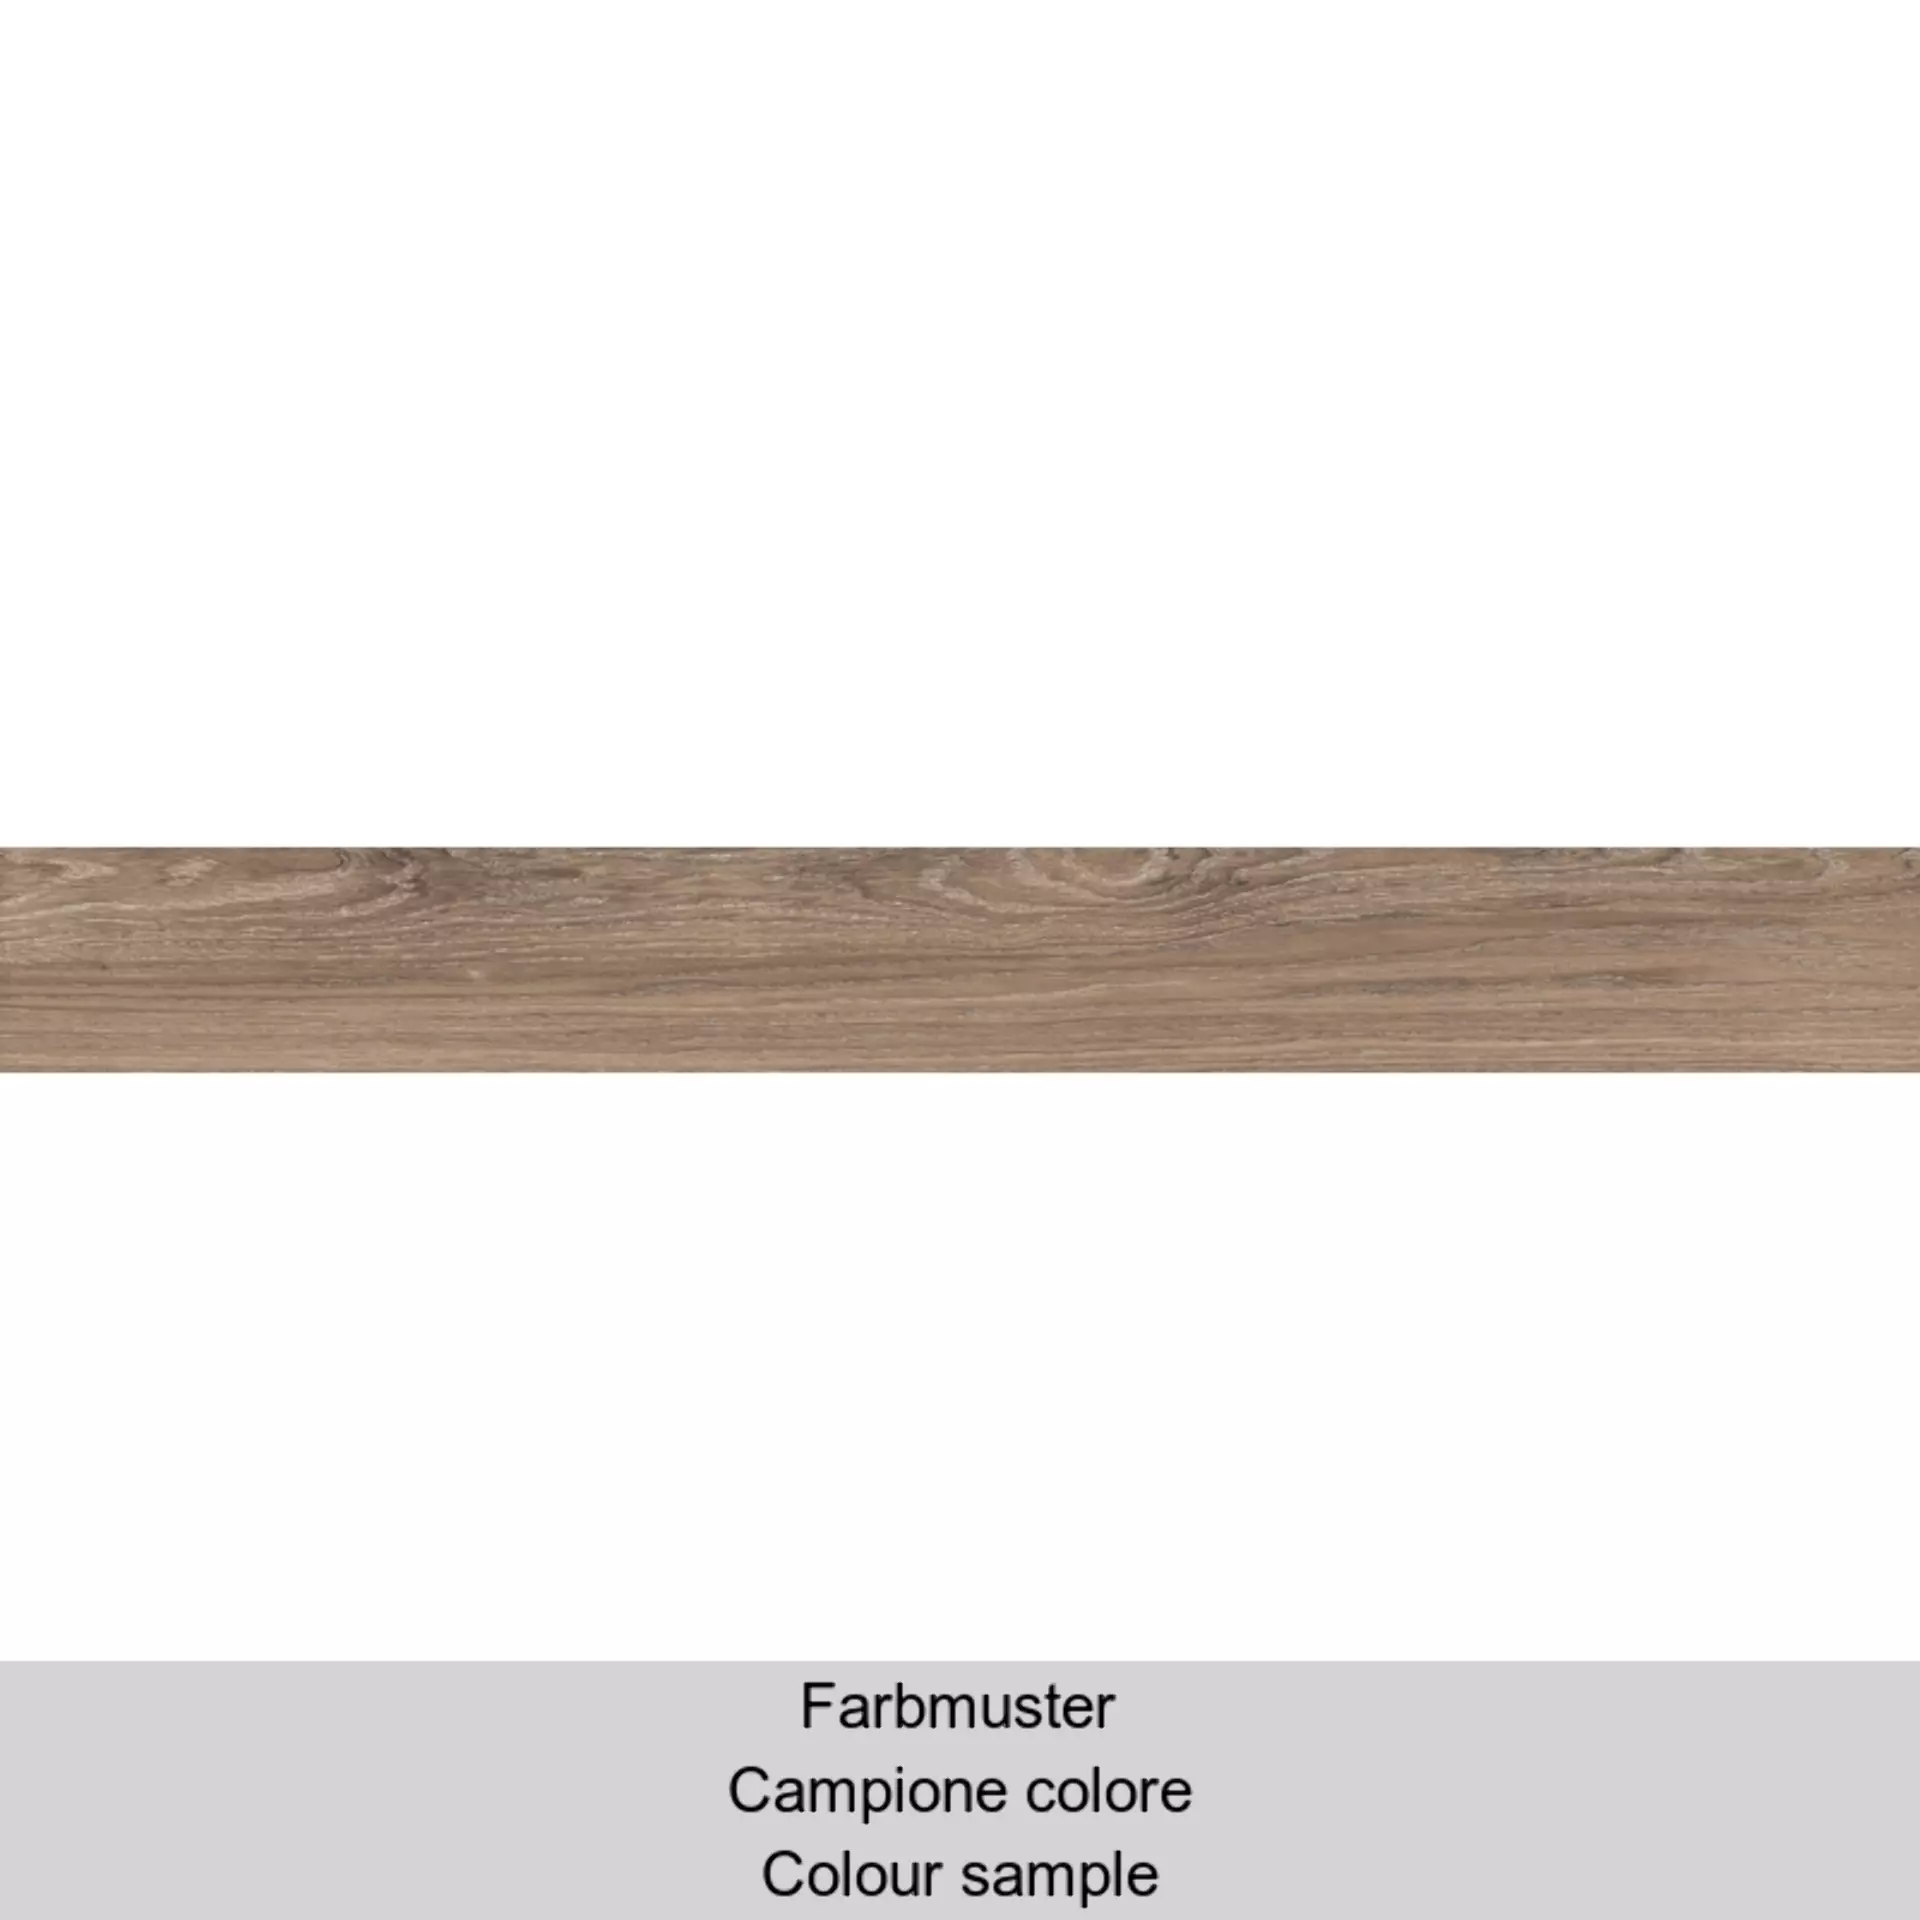 ABK Eco-Chic Avana Naturale PF60005051 20x170cm rectified 8,5mm